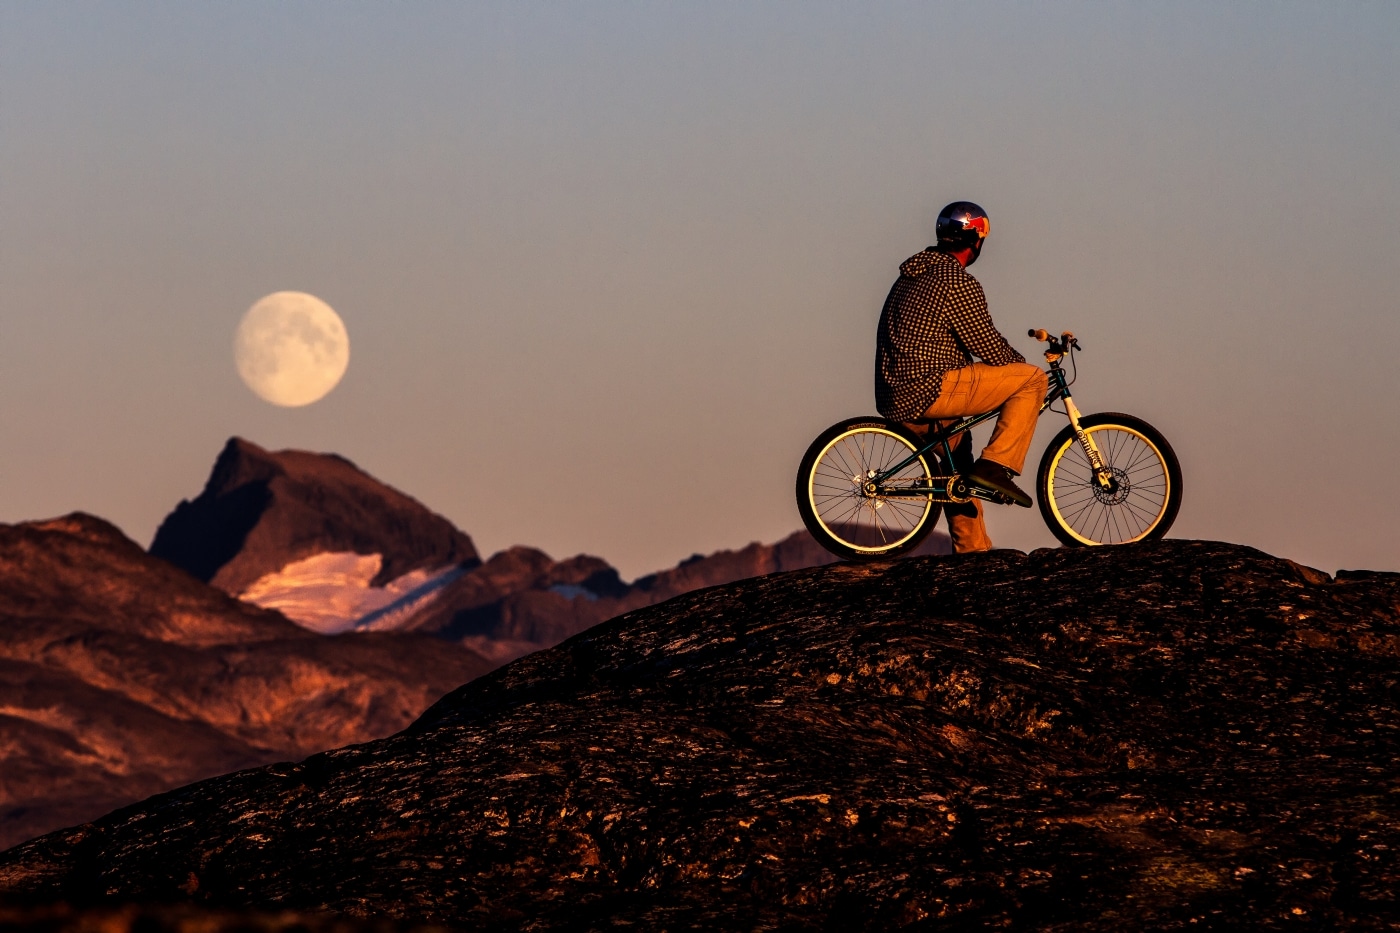 Red Bull trial biker Petr Kraus and the full moon at sunset in Kangaamiut in Greenland. Photo by Mads Pihl - Visit Greenland